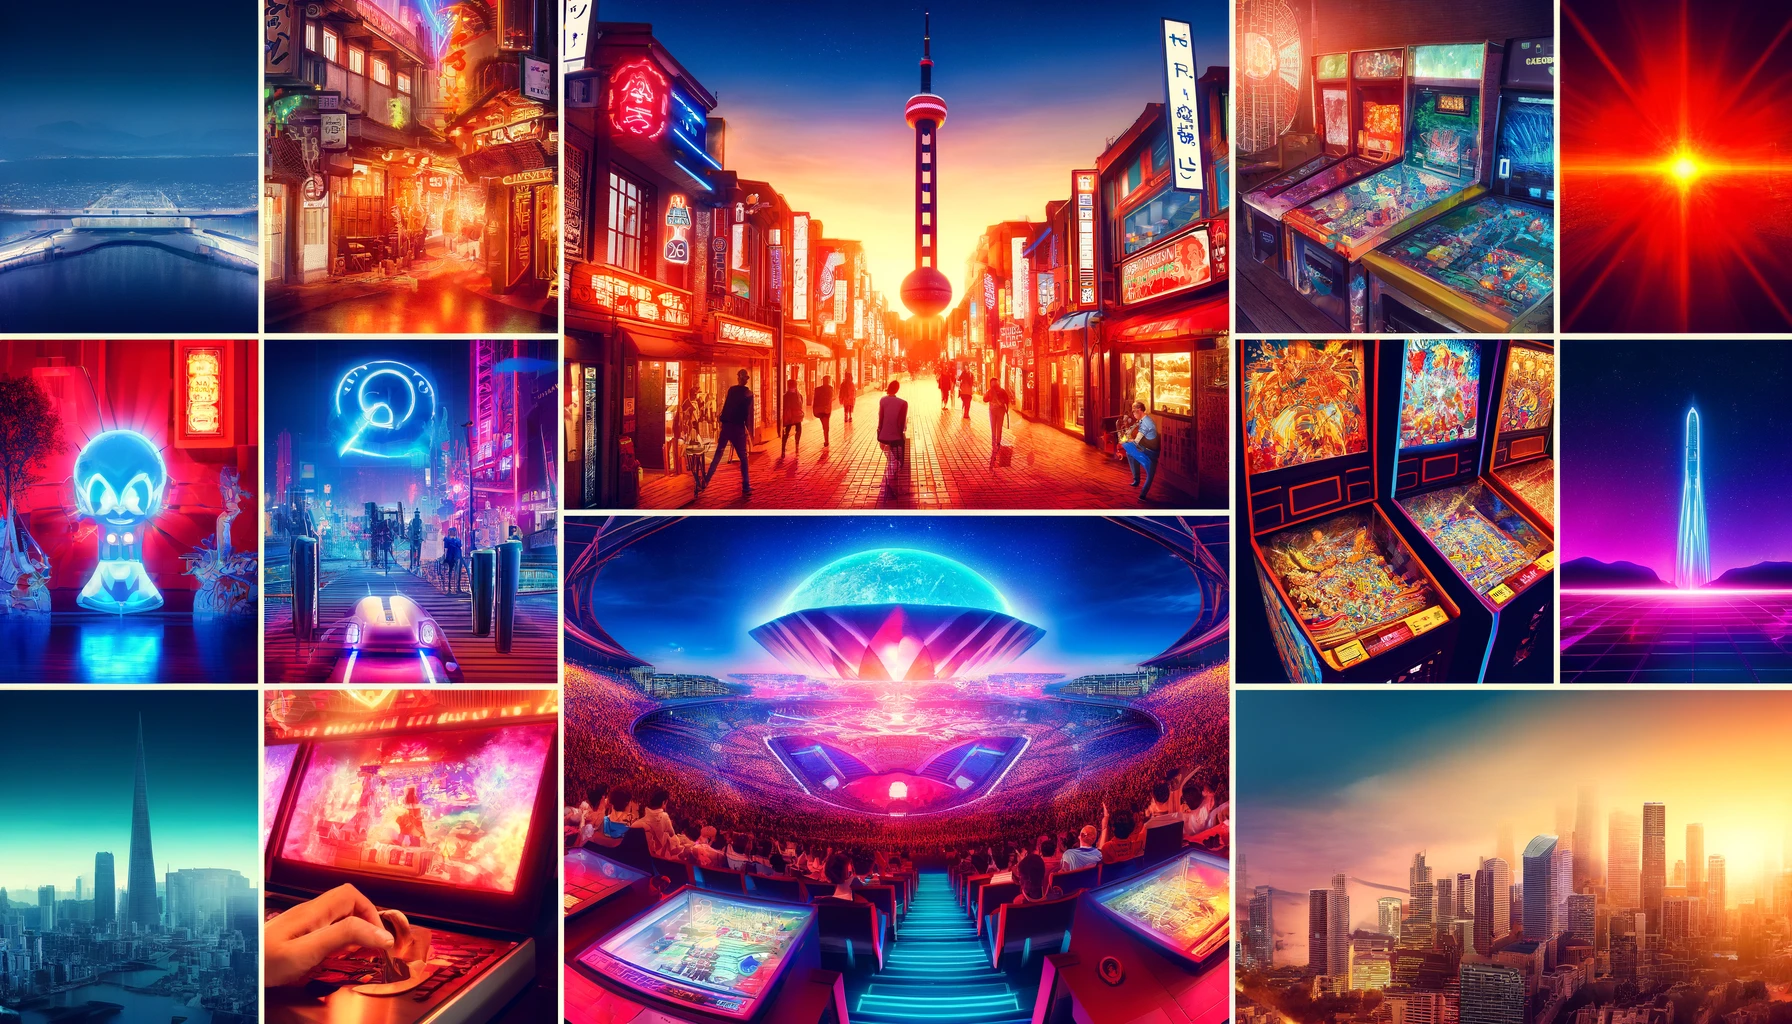 A vibrant collage showcasing various global gaming destinations, including neon-lit streets, a colorful theme park, high-tech gaming setups, an esports arena with cheering crowds, classic arcade machines, and vintage pinball machines, capturing the excitement and diversity of gaming experiences.